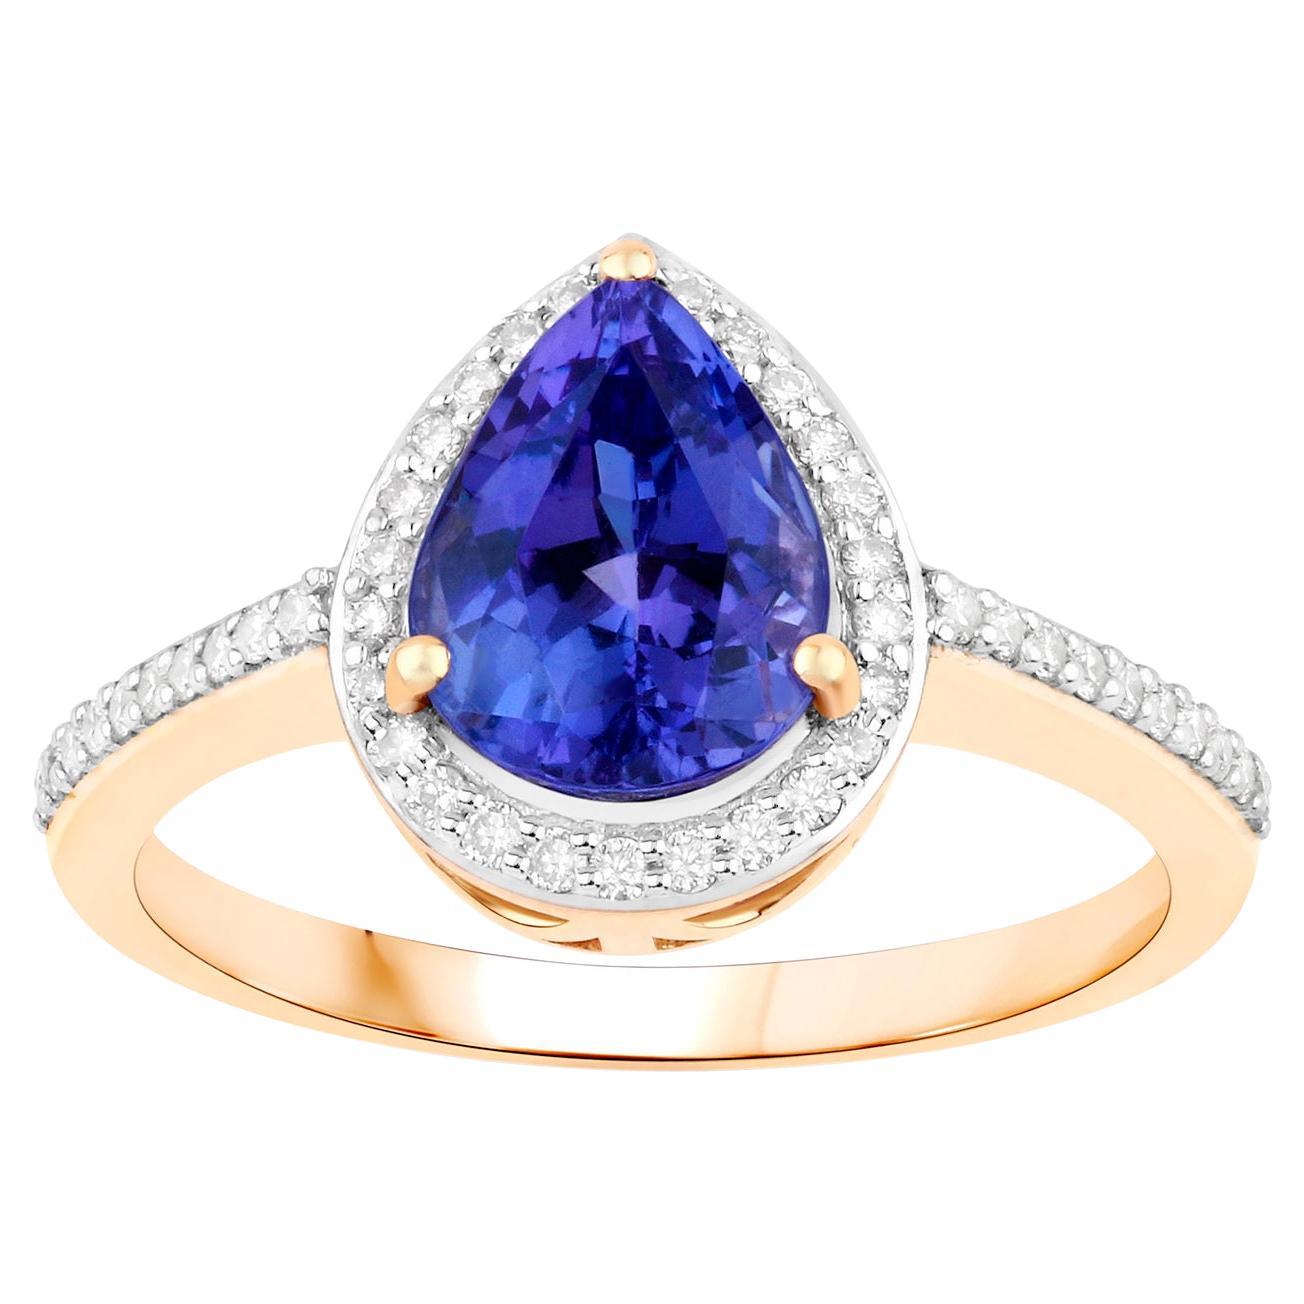 Tanzanite Ring With Diamonds 2.39 Carats 14K Yellow Gold For Sale